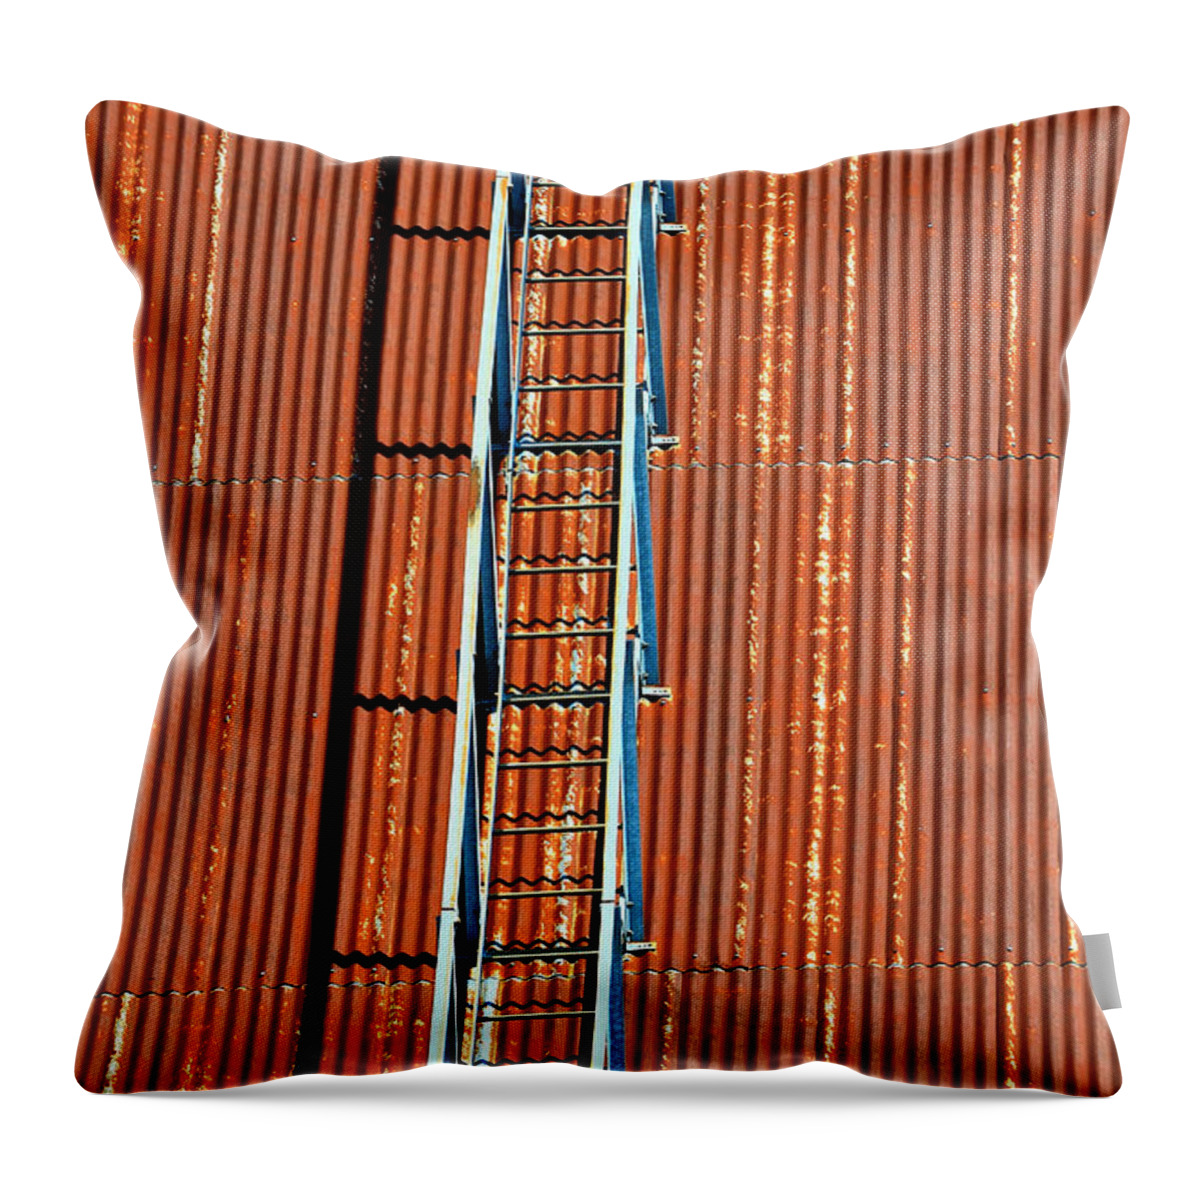 Texas Throw Pillow featuring the photograph Grain Stairway by Erich Grant